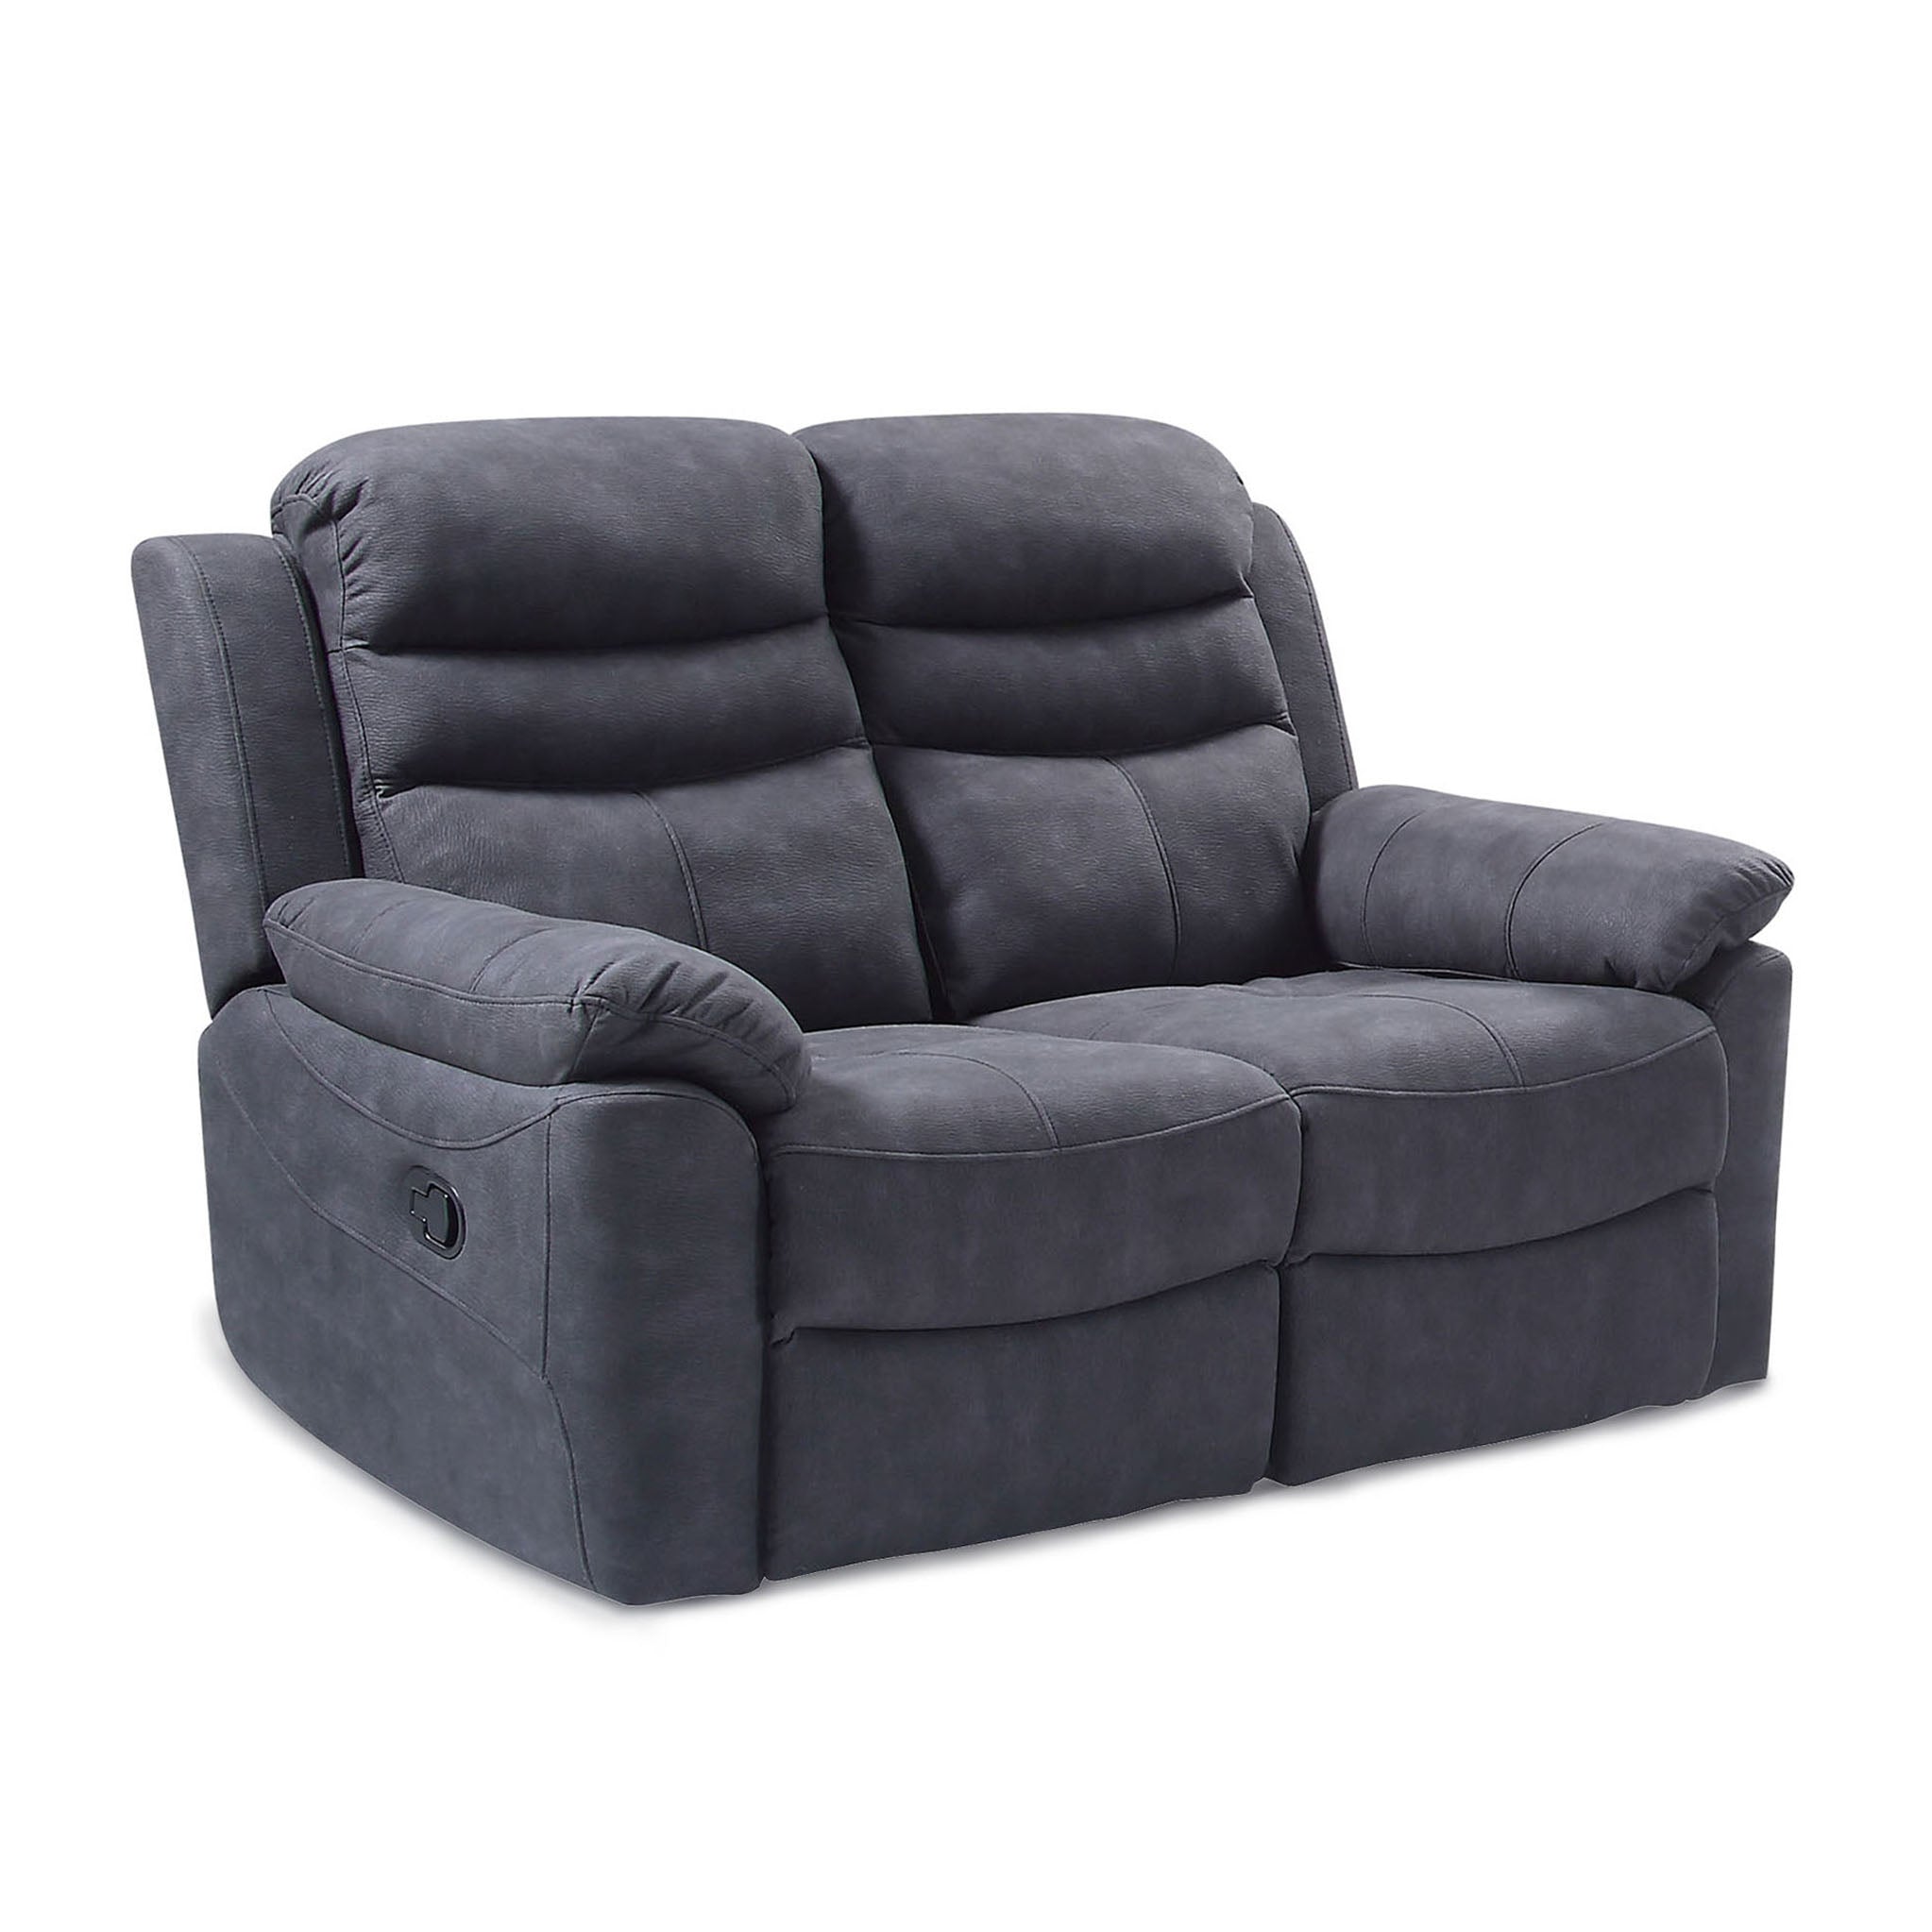 Conway 2 Seater Recliner Sofa Charcoal Roseland